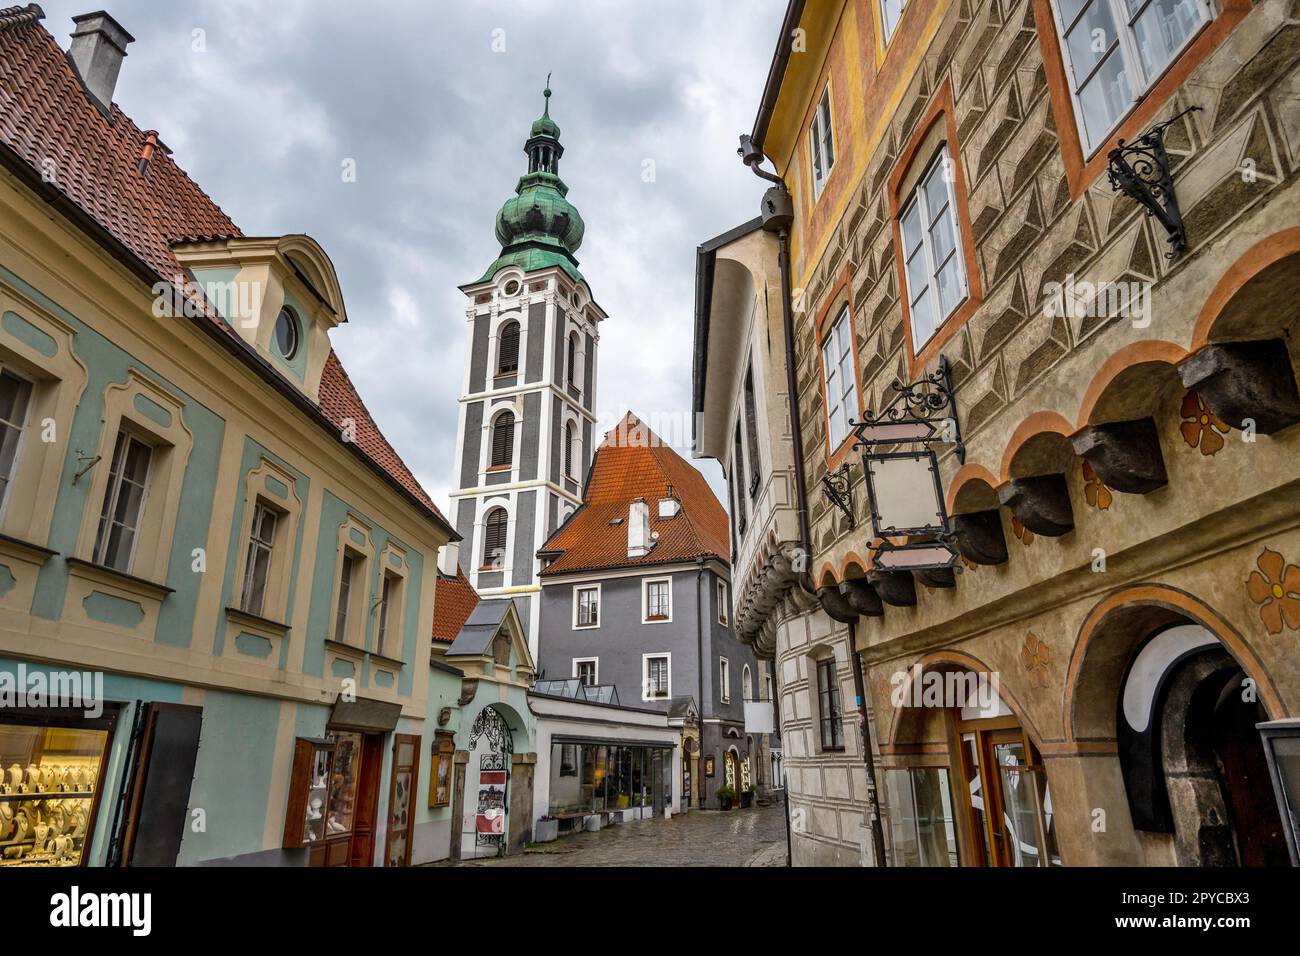 One of Cesky Krumlov street on Latran, picturesque historical building with sgrafito, church, Czech republic. Stock Photo